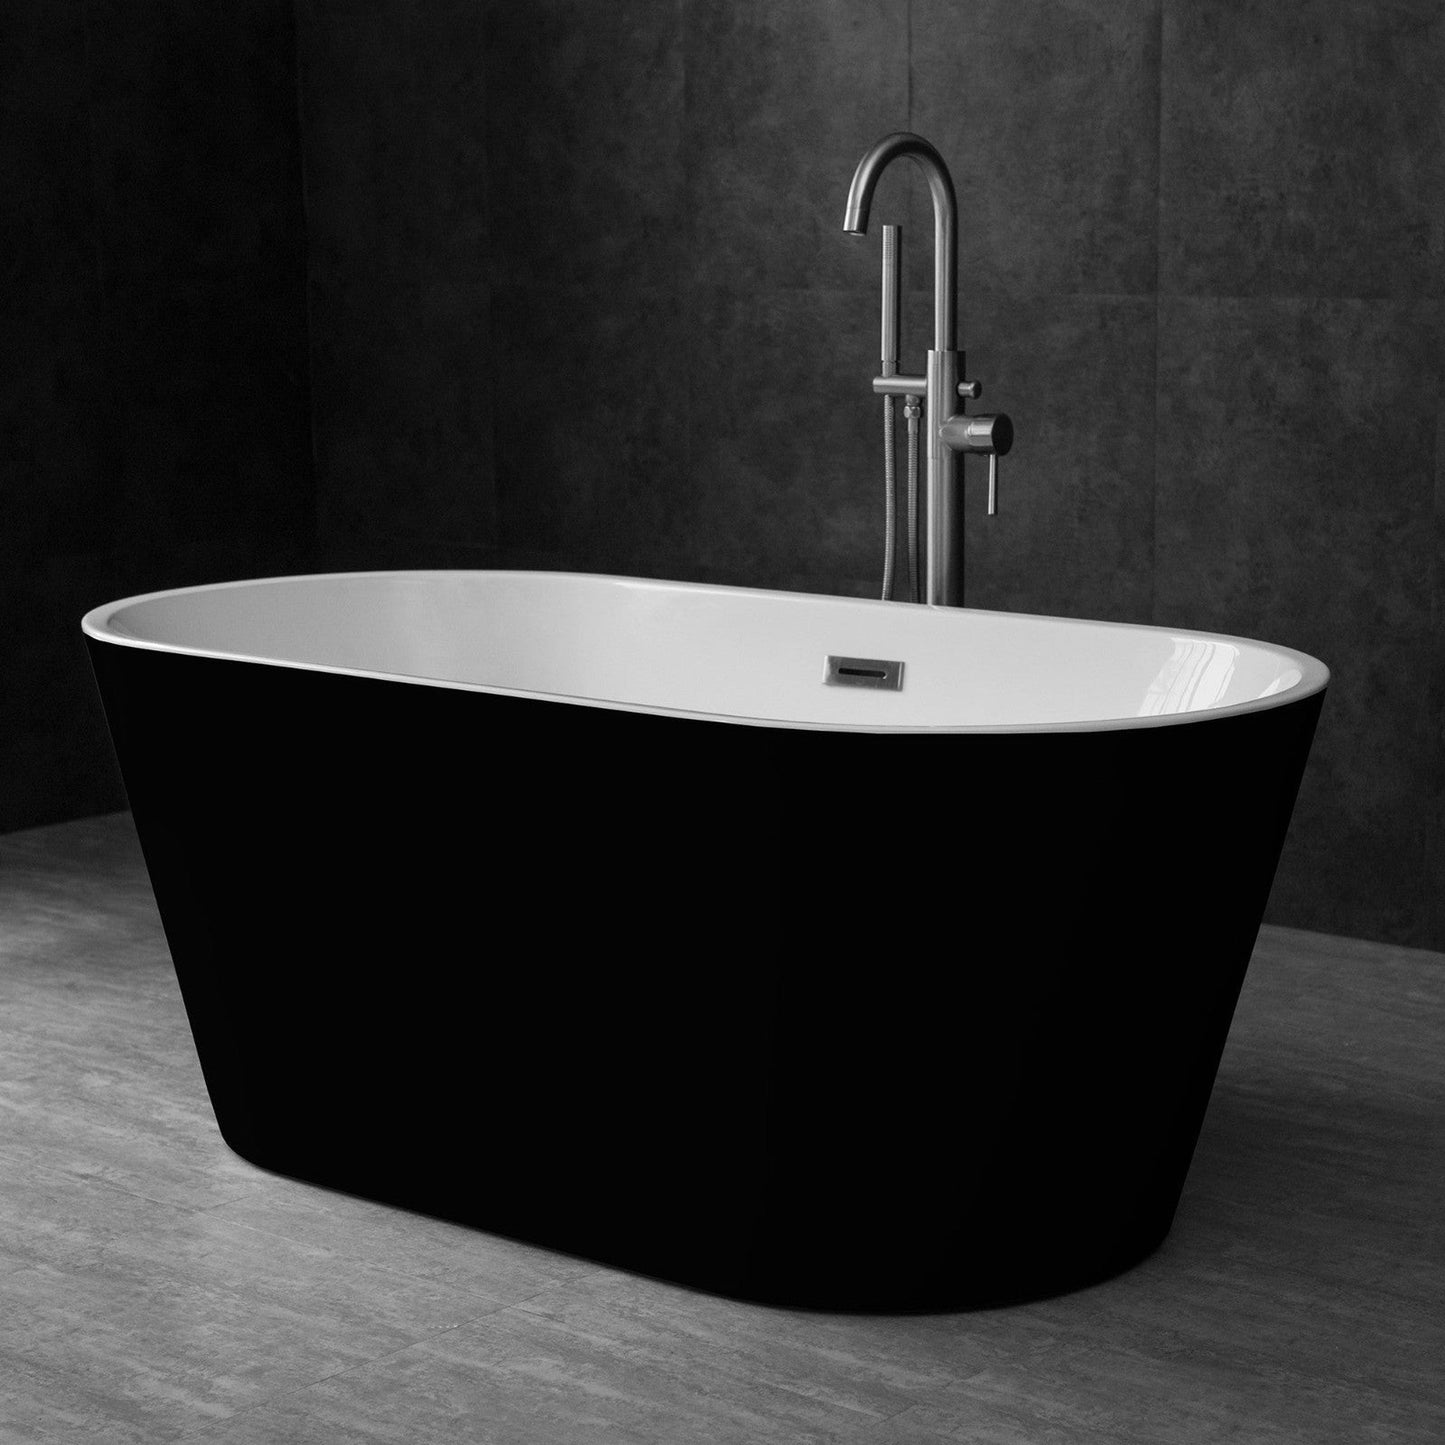 WoodBridge 59" Black Acrylic Freestanding Contemporary Soaking Bathtub With Brushed Nickel Drain, Overflow, F0001BNSQ Tub Filler and Caddy Tray